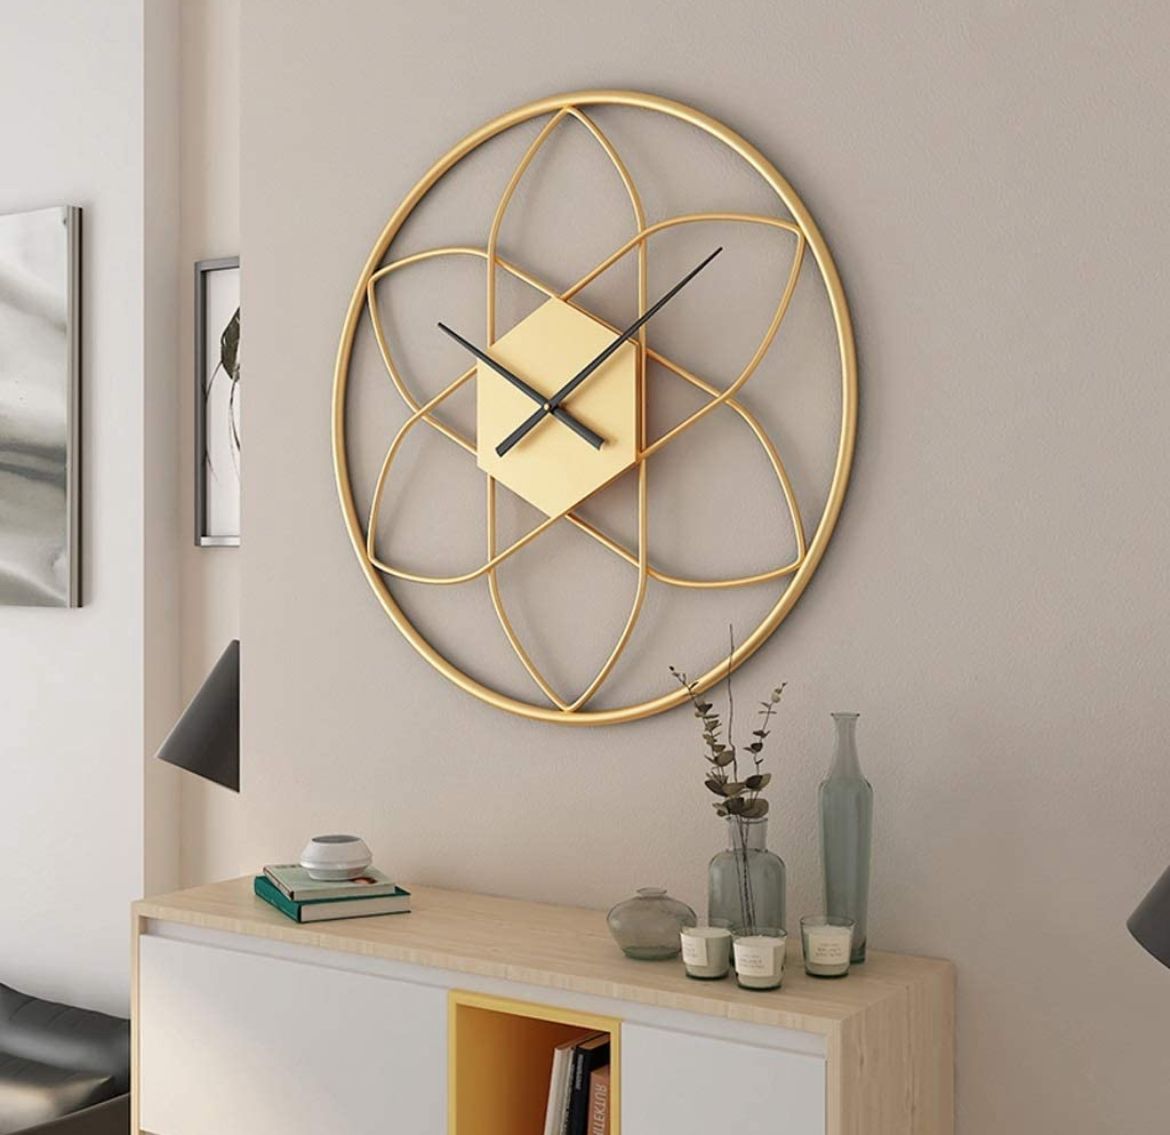 Metal Wall Clock - 24 Inch Vintage Golden Design, Ideal for Home Décor